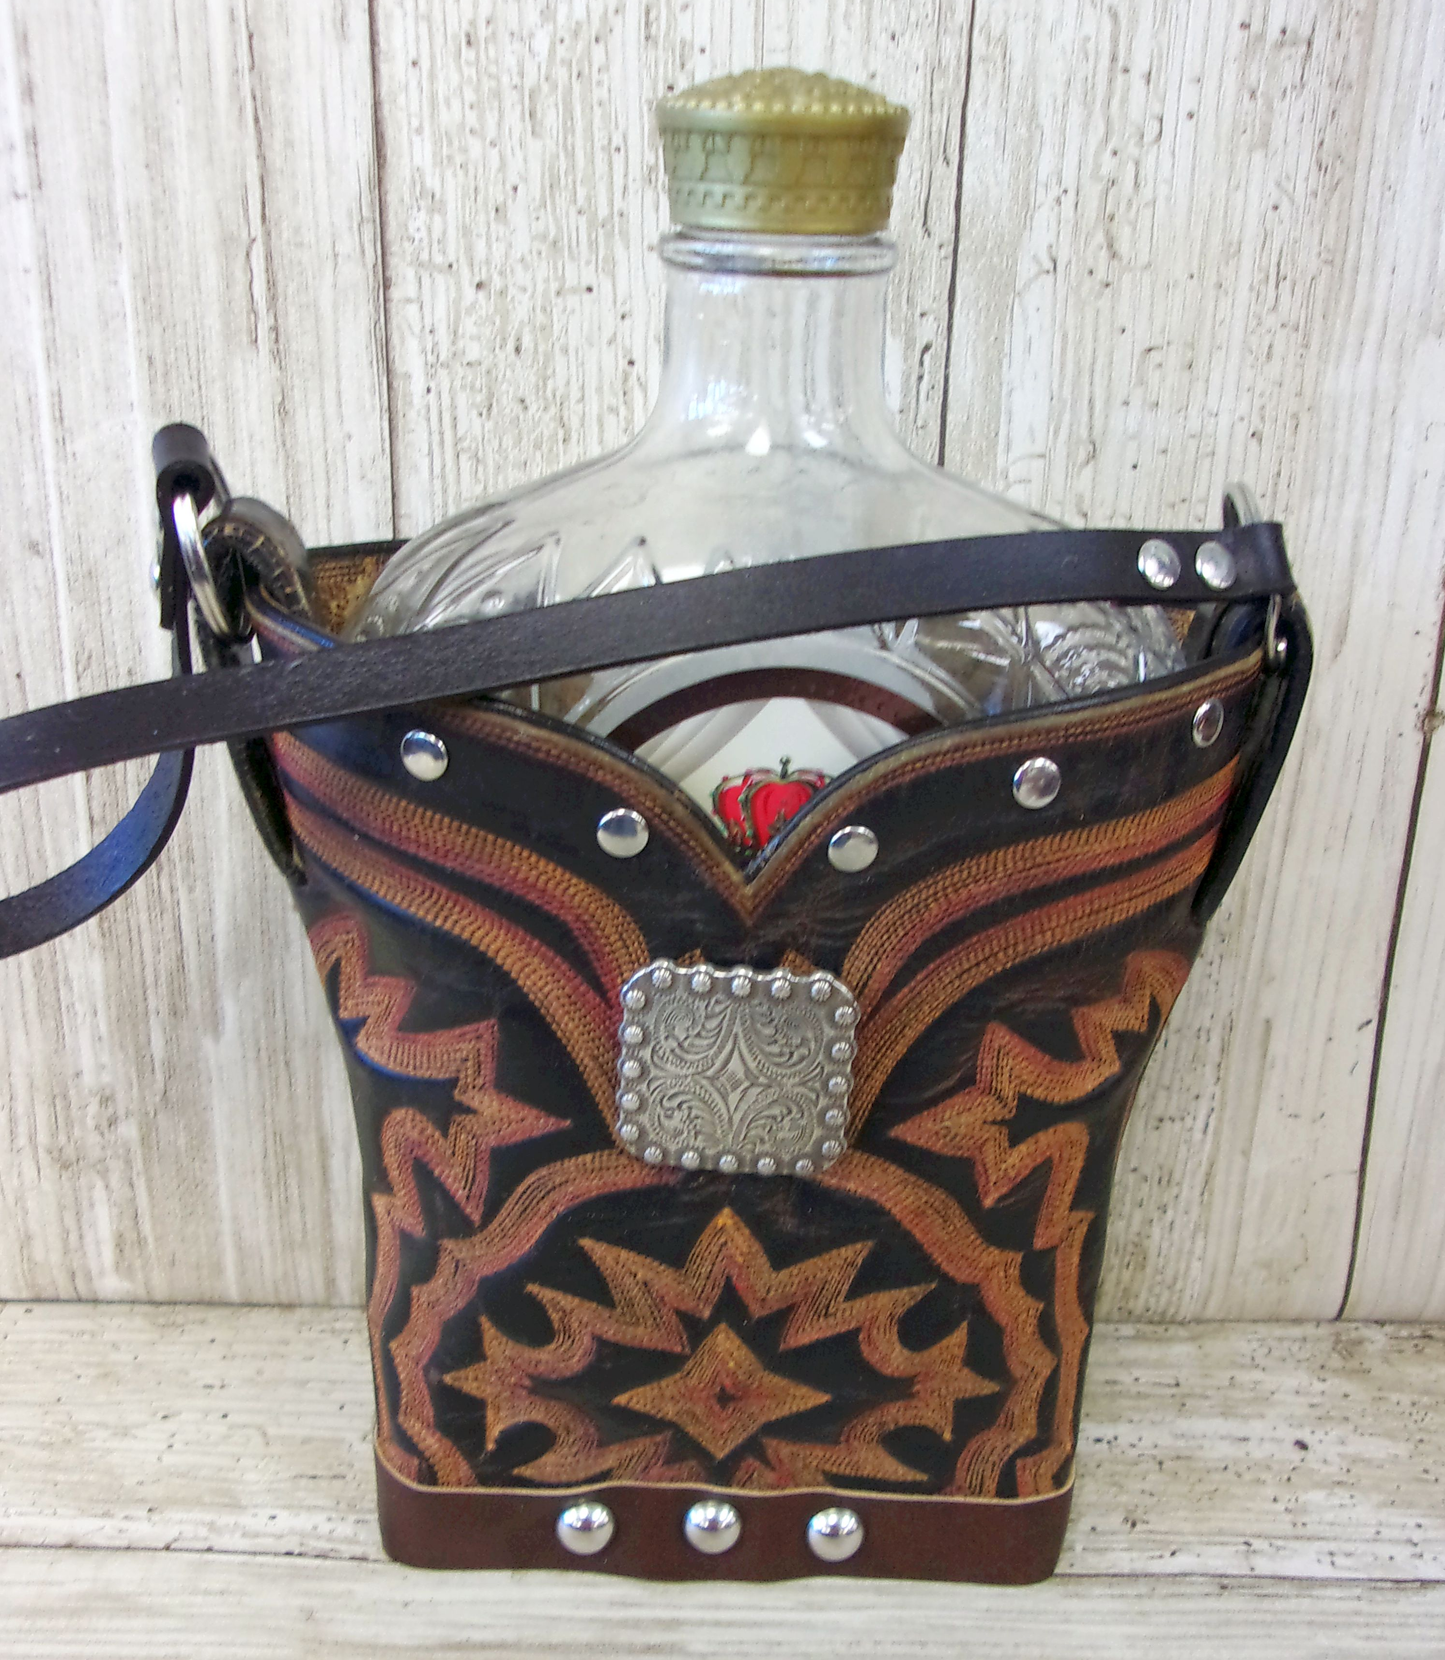 Cowboy Boot Whiskey Tote CR156 handcrafted from cowboy boots. Shop all unique leather western handbags, purses and totes at Chris Thompson Bags